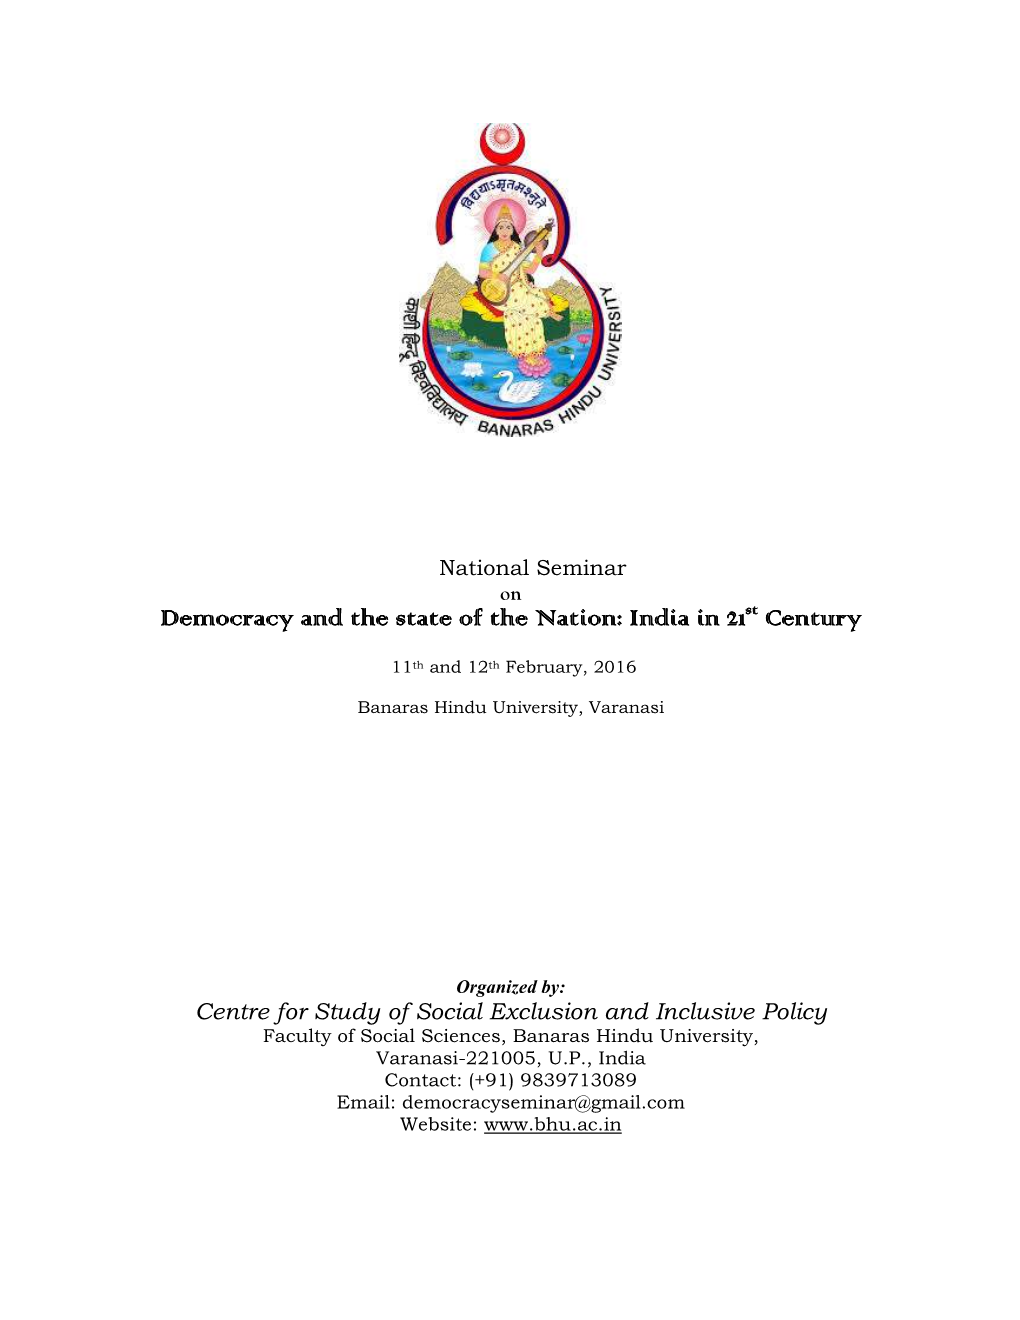 Democracy and the State of the Nation: India in 21St Century